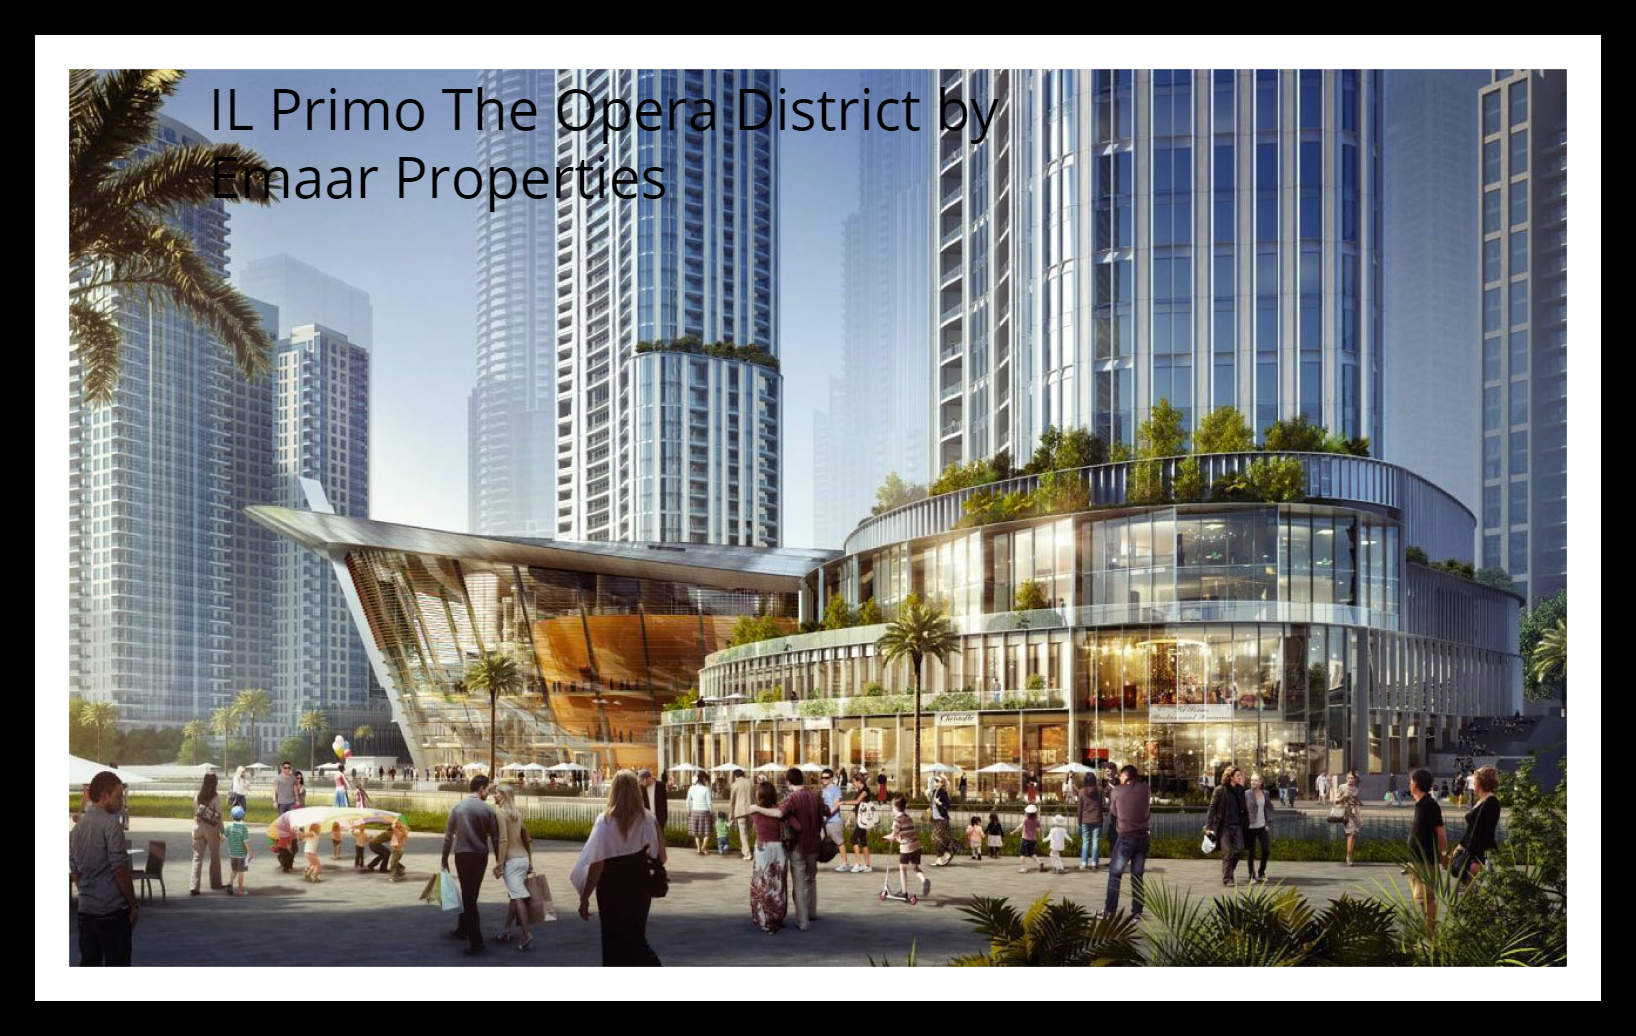 IL Primo The Opera District by Emaar Properties